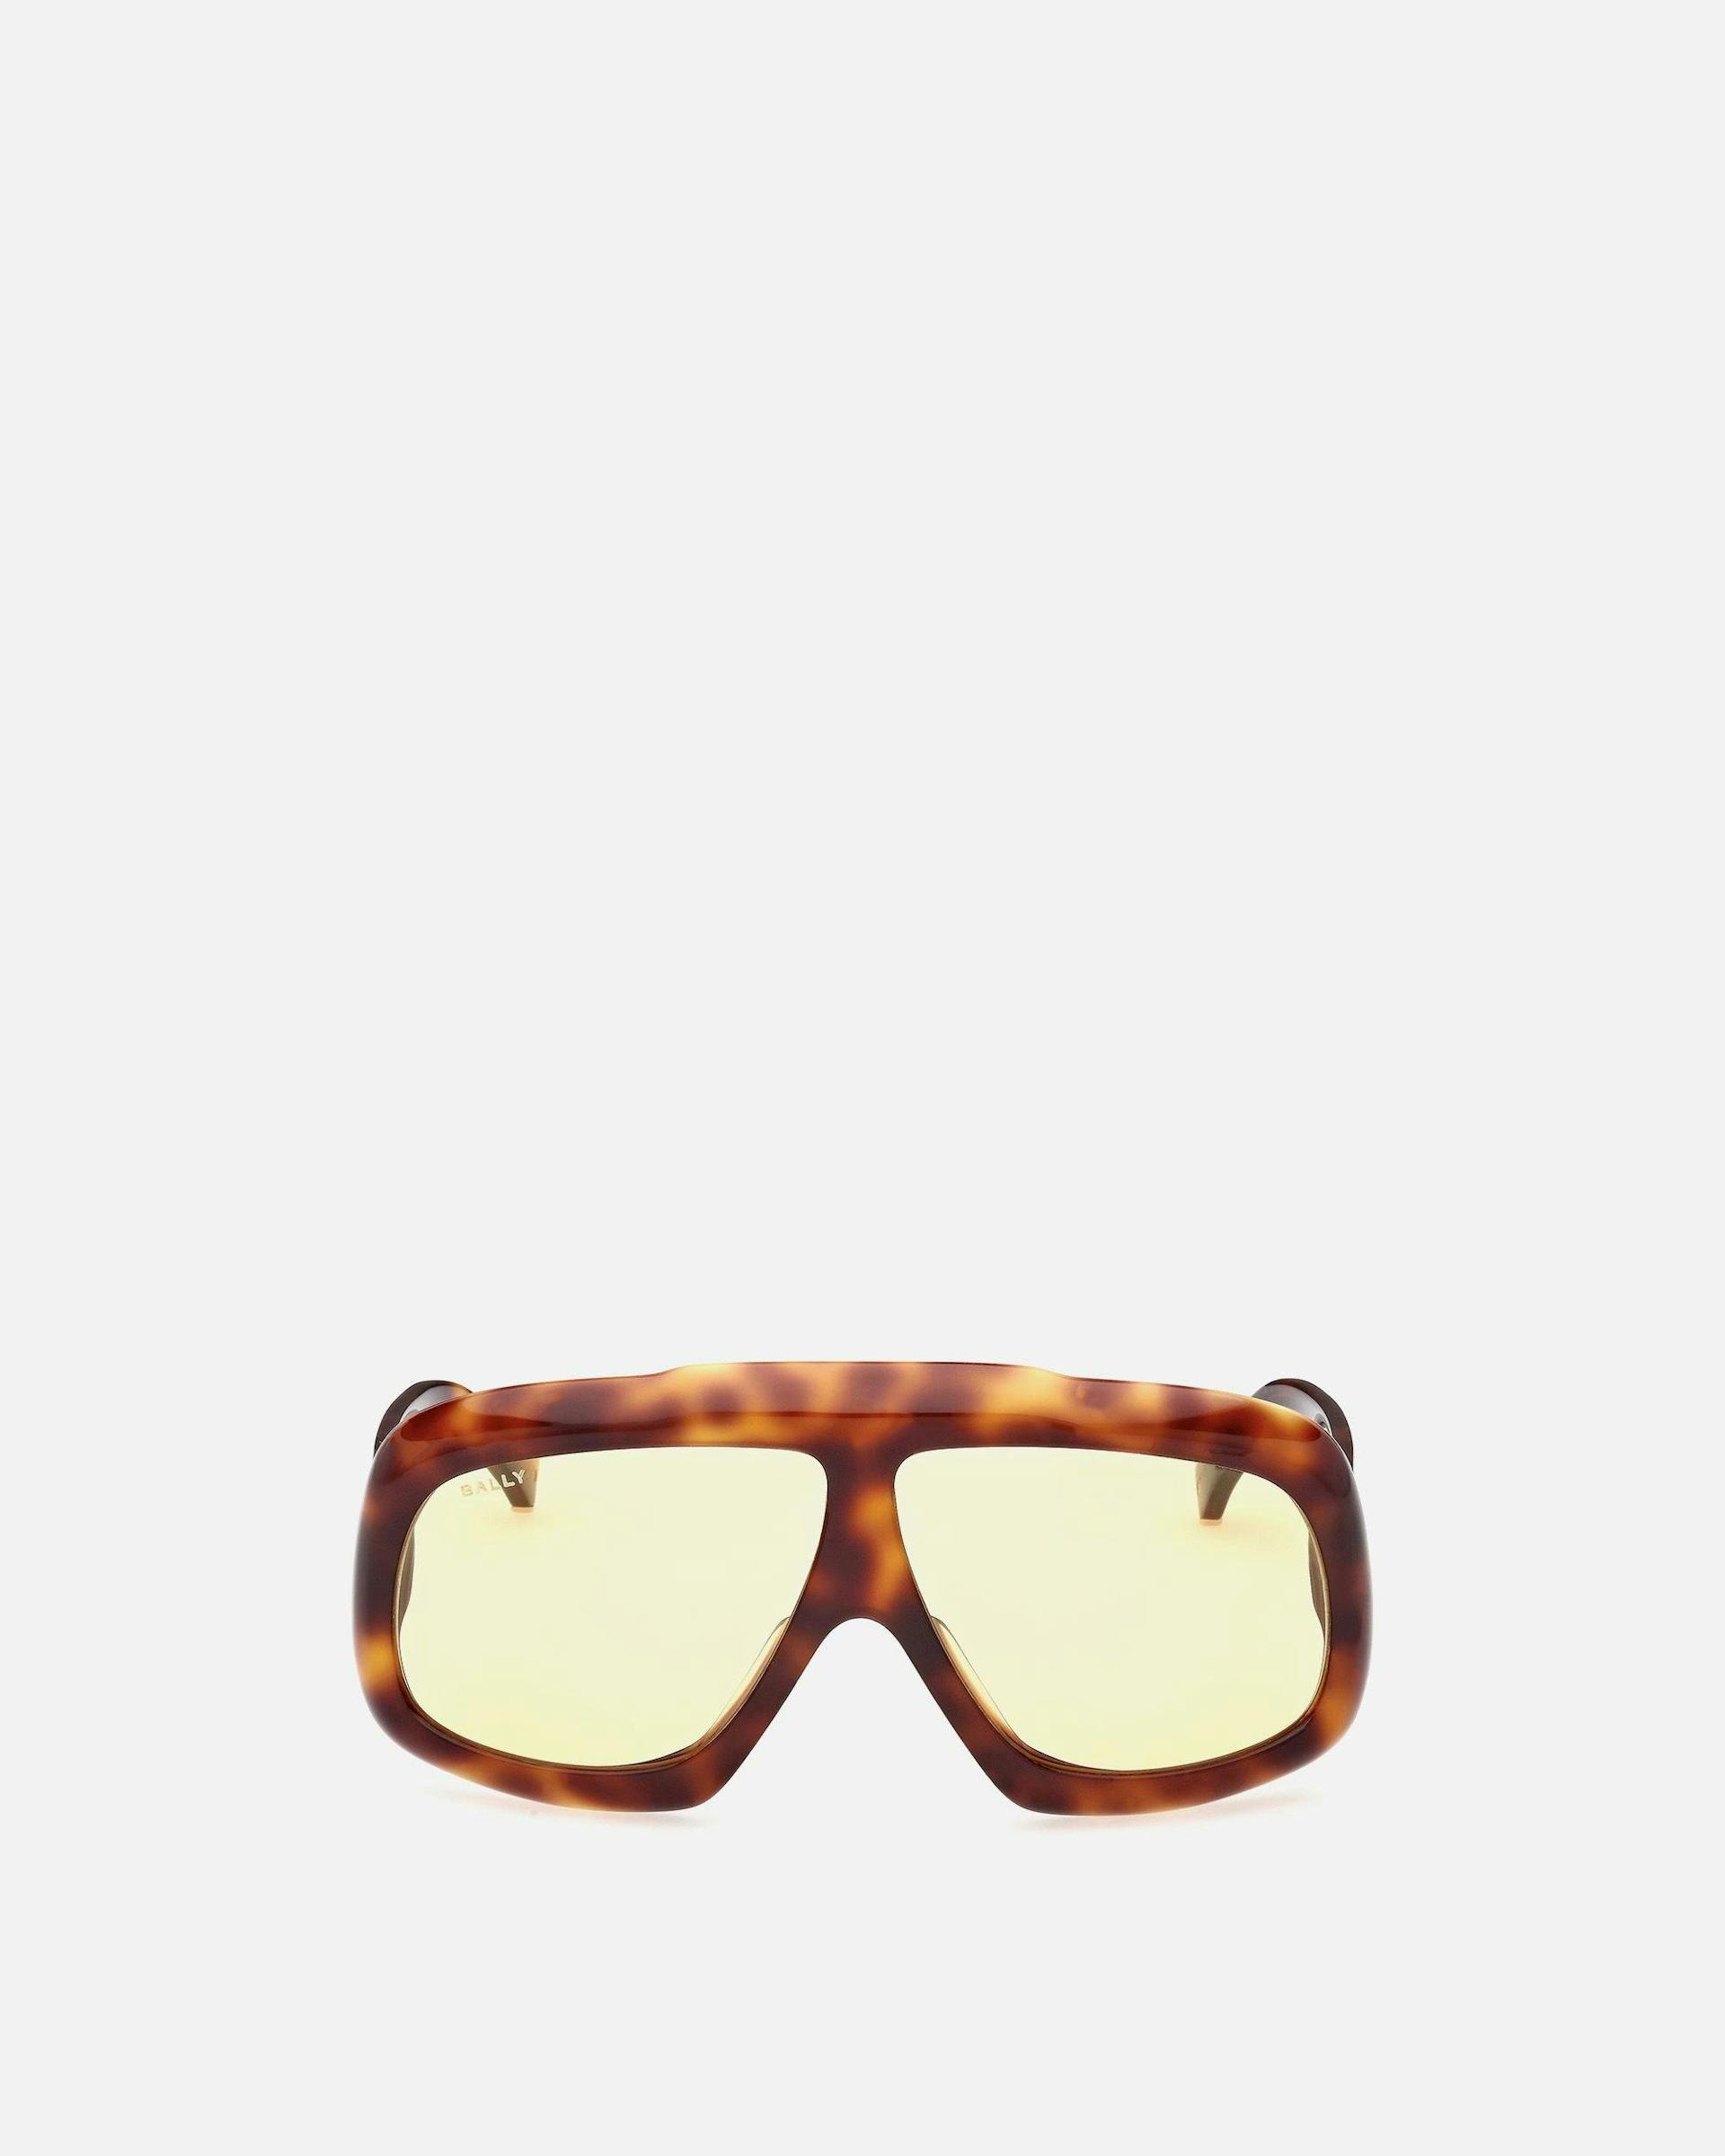 Eyger Acetate Sunglasses in Havana and Yellow | Bally | Still Life Front